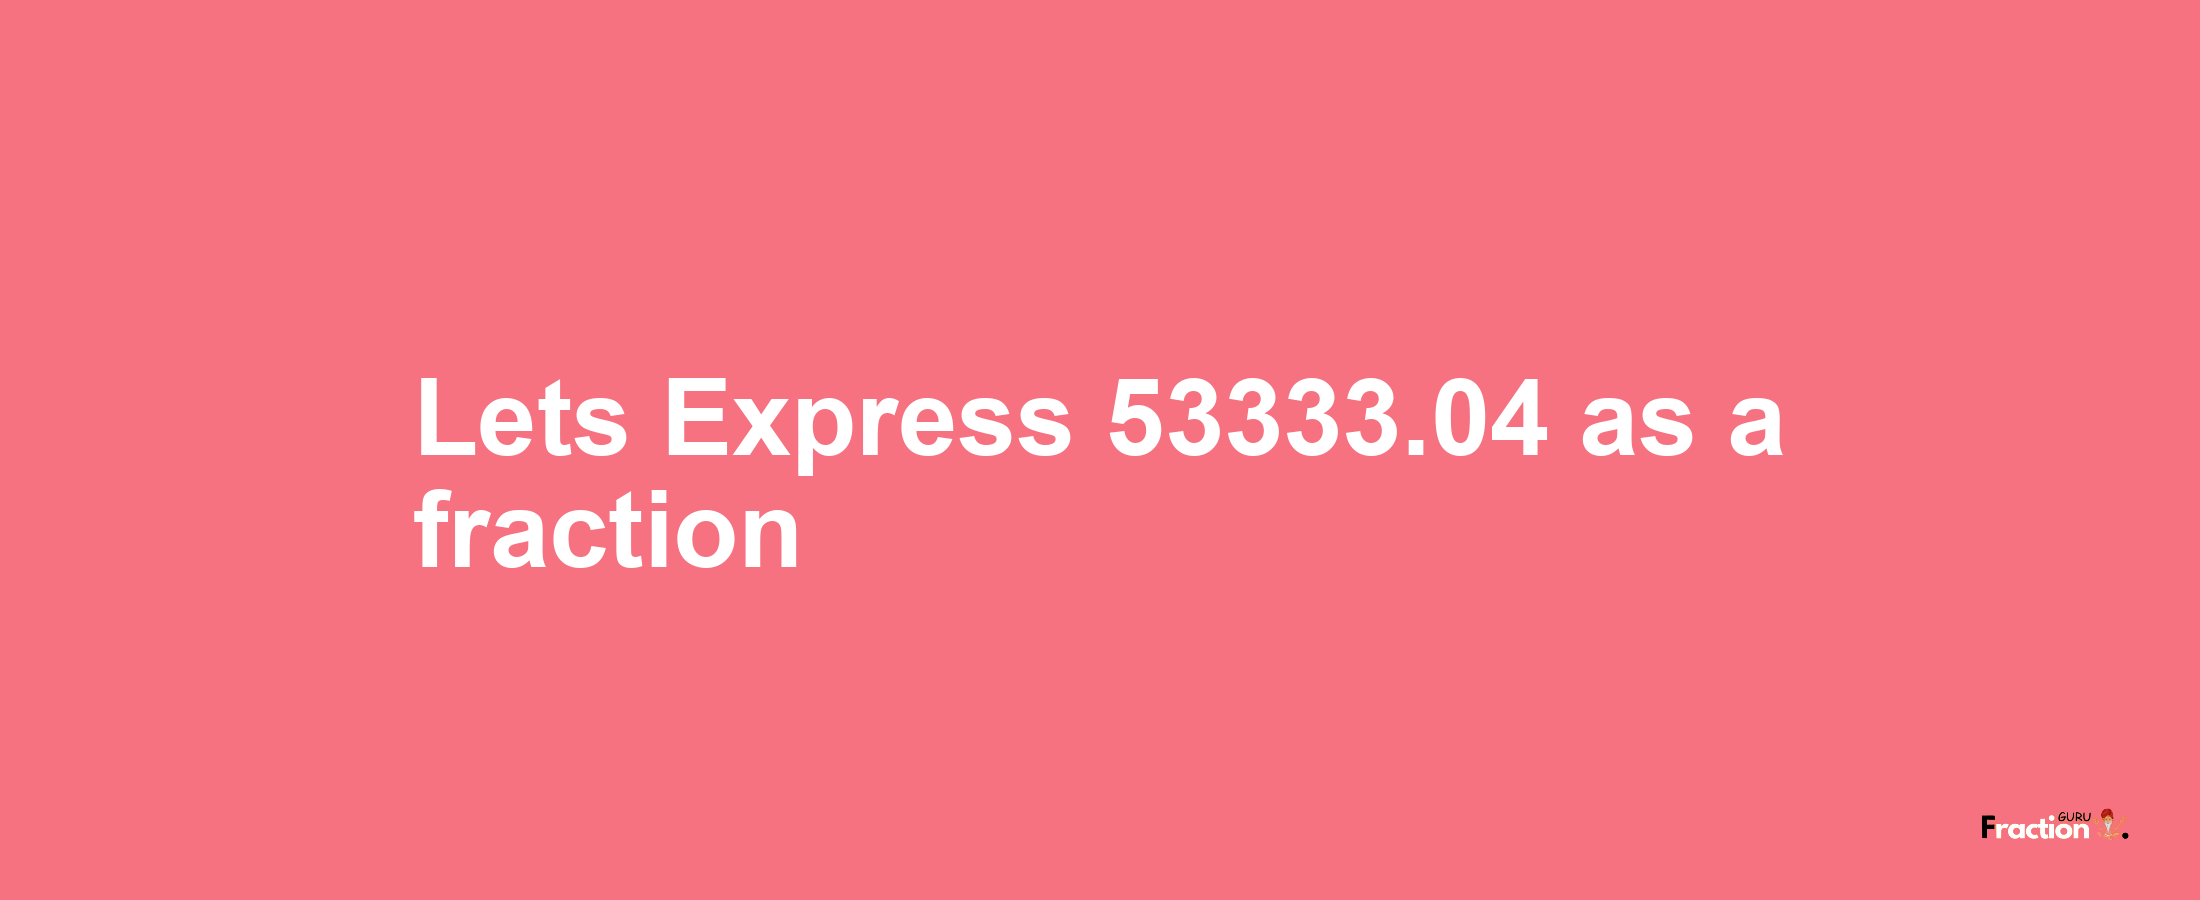 Lets Express 53333.04 as afraction